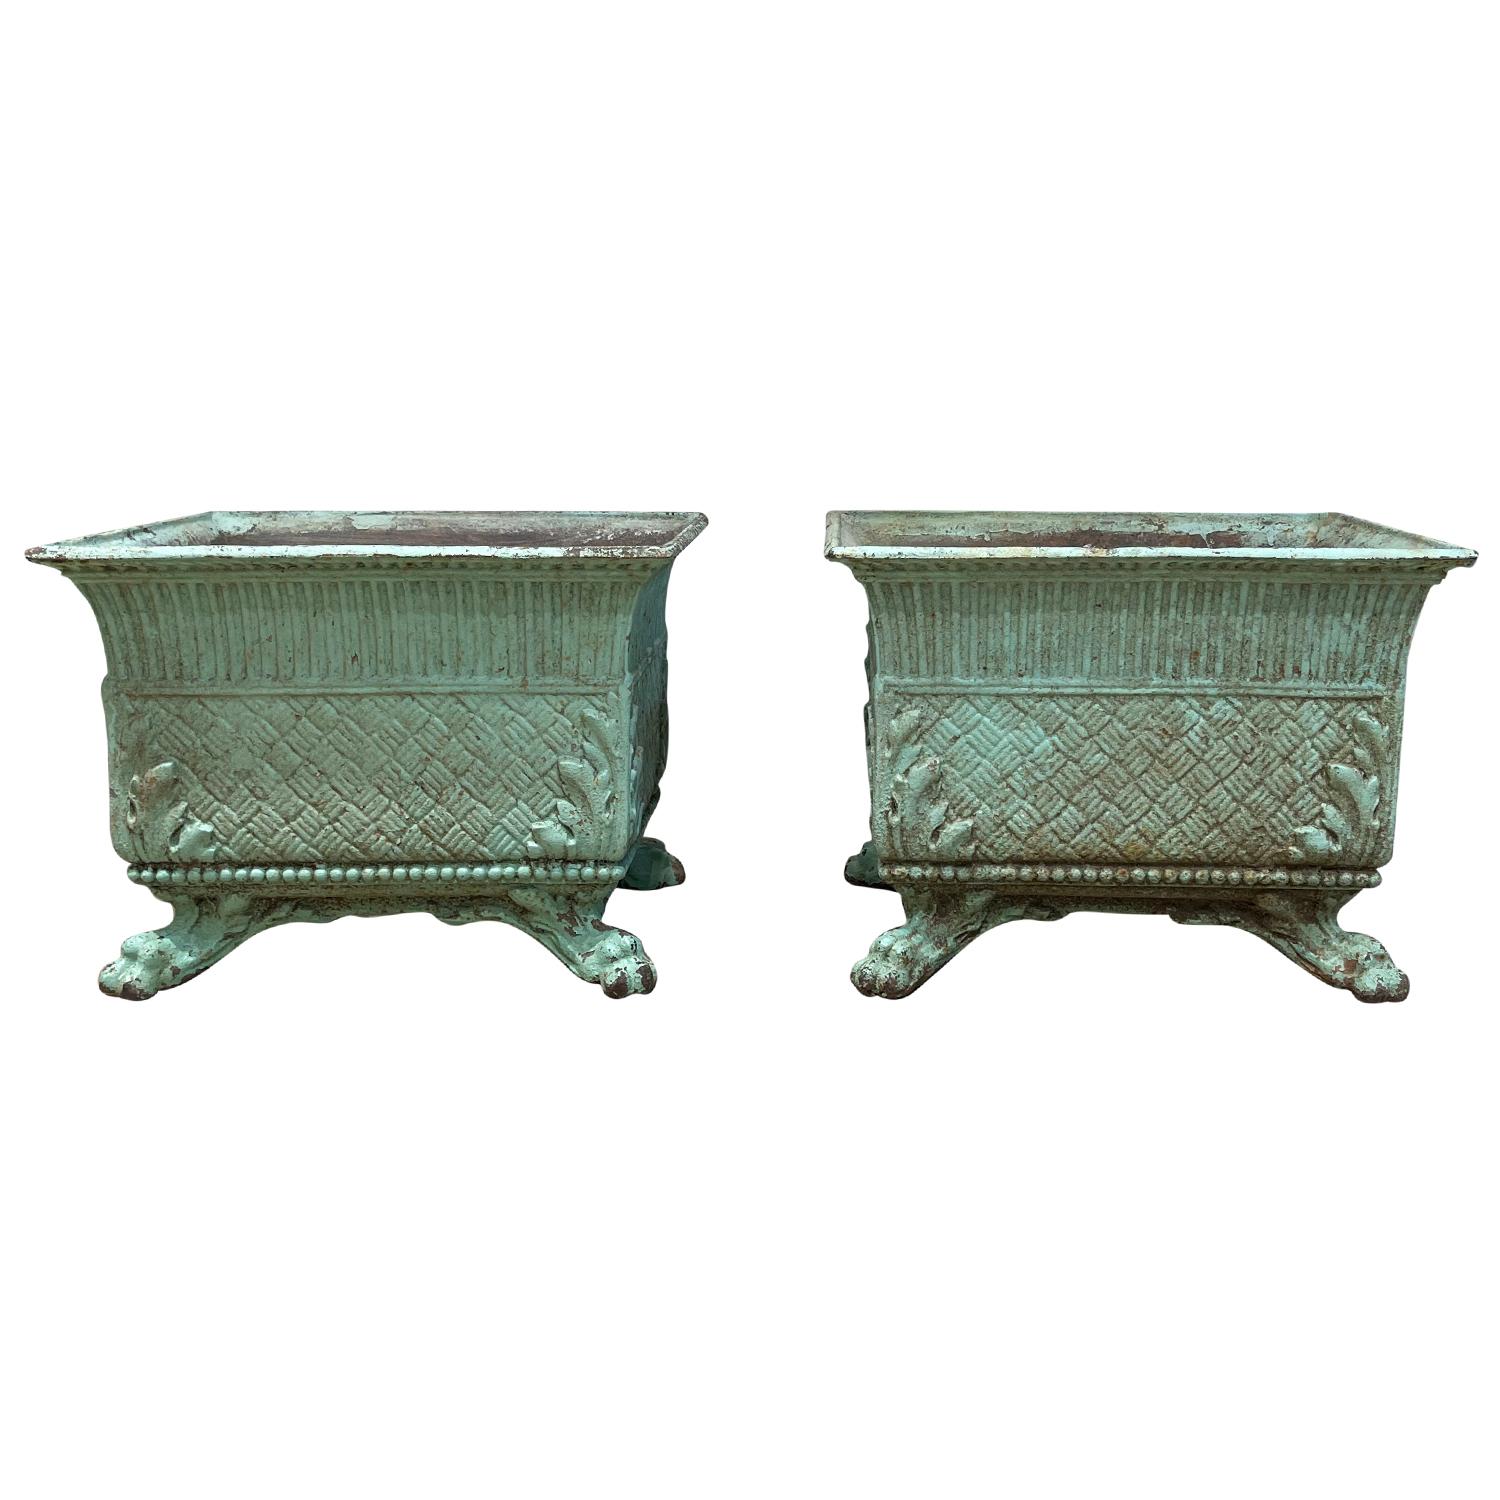 An antique pair of rectangular French cast iron planters garden planters, raised on little feet in good condition. Wear consistent with age and use. Circa 19th Century, Lyon, France.